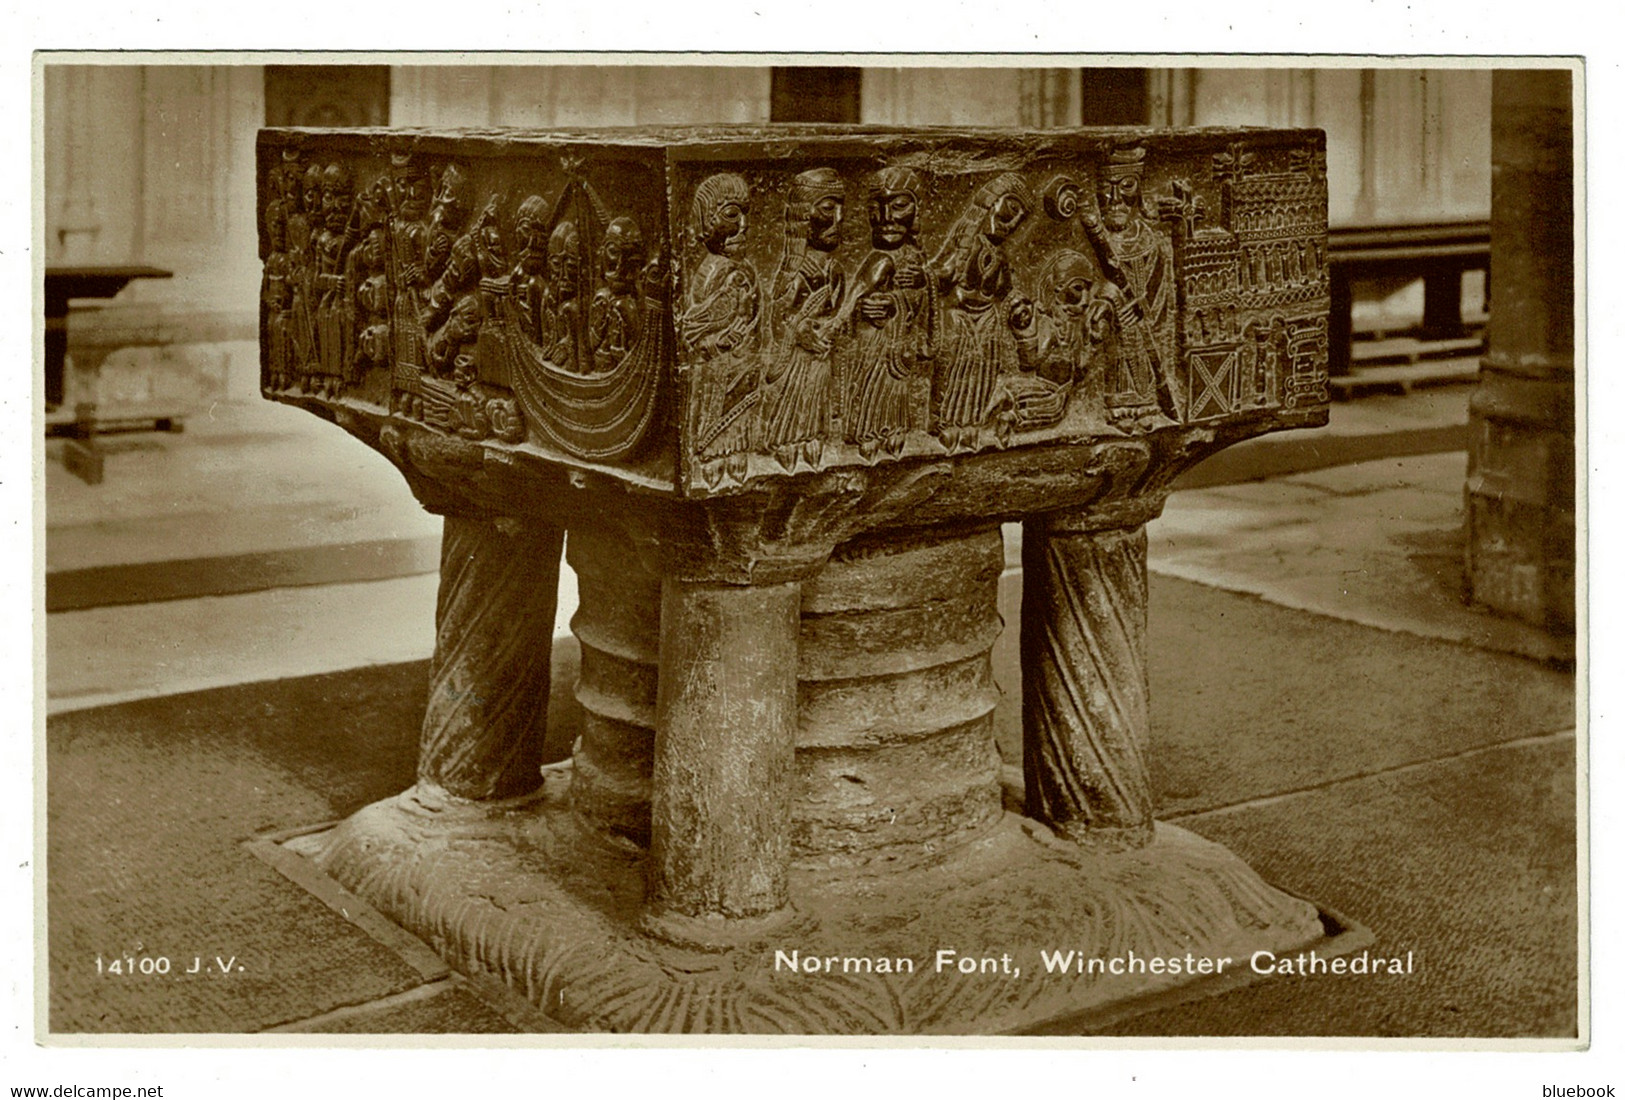 Ref 1445 - Early Real Photo Postcard - Norman Font Winchester Cathedral - Hampshire - Winchester